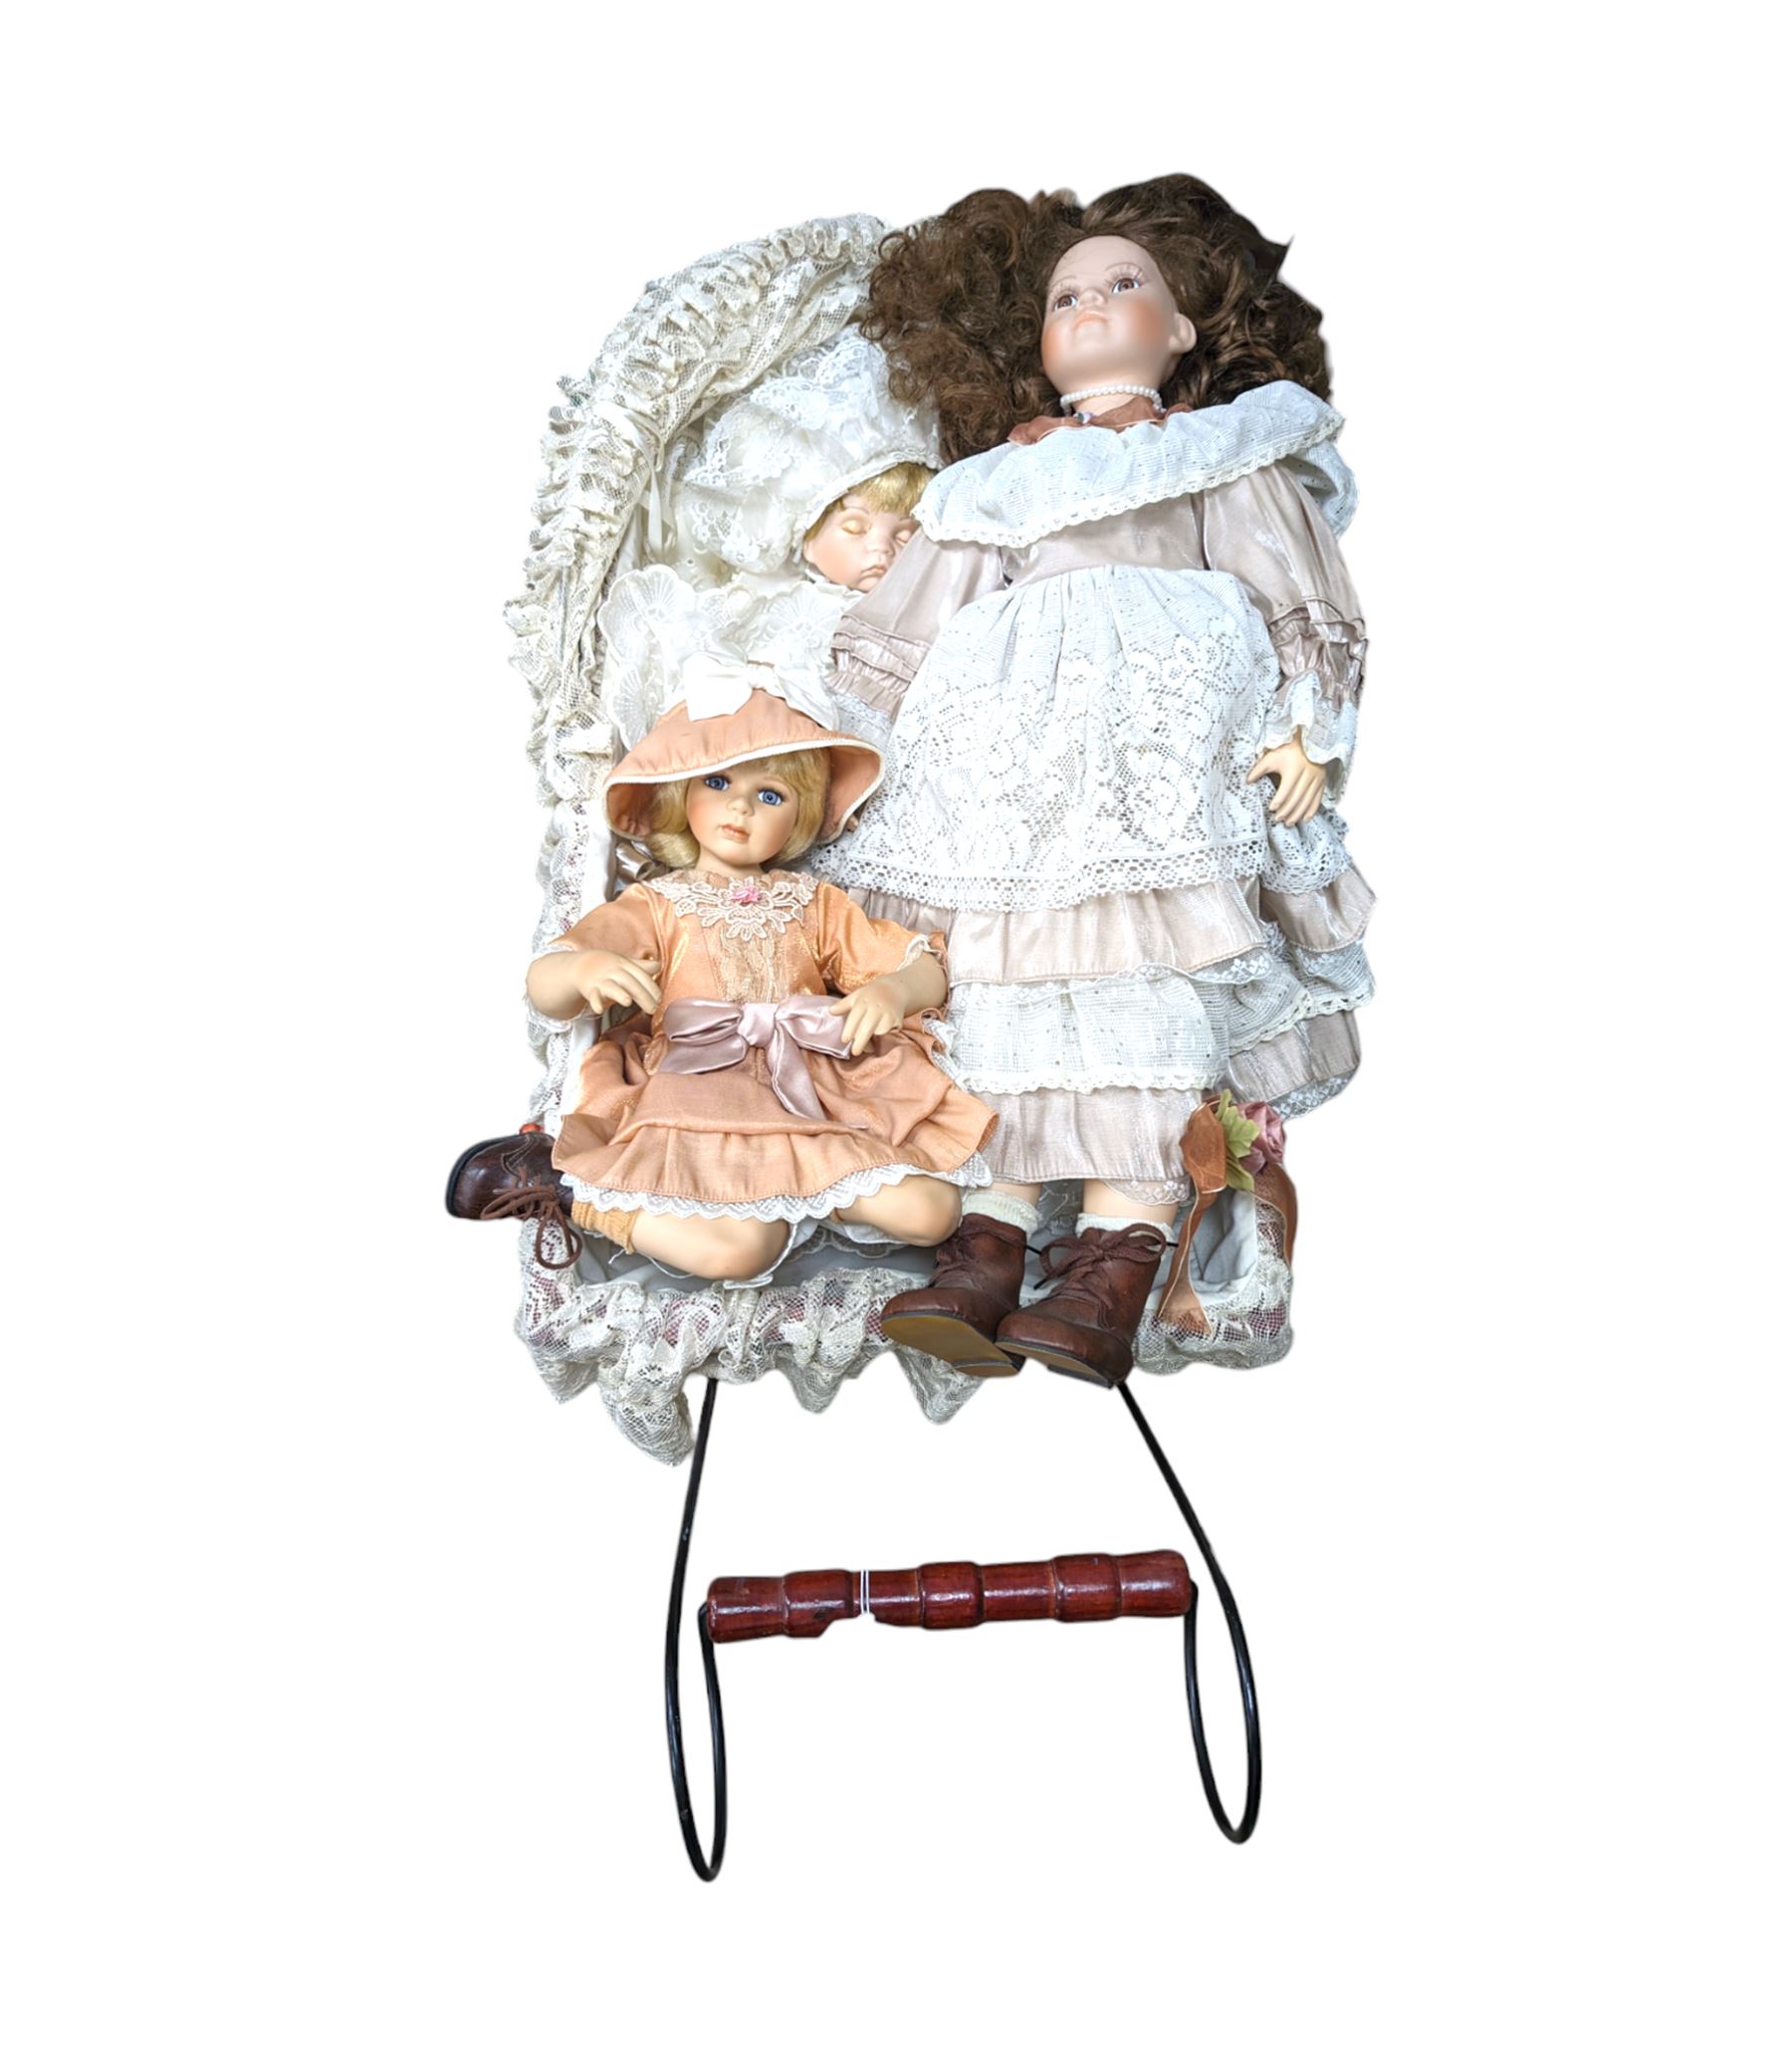 Three porcelain dolls and a wicker dolls pram with lace cover - Image 2 of 2